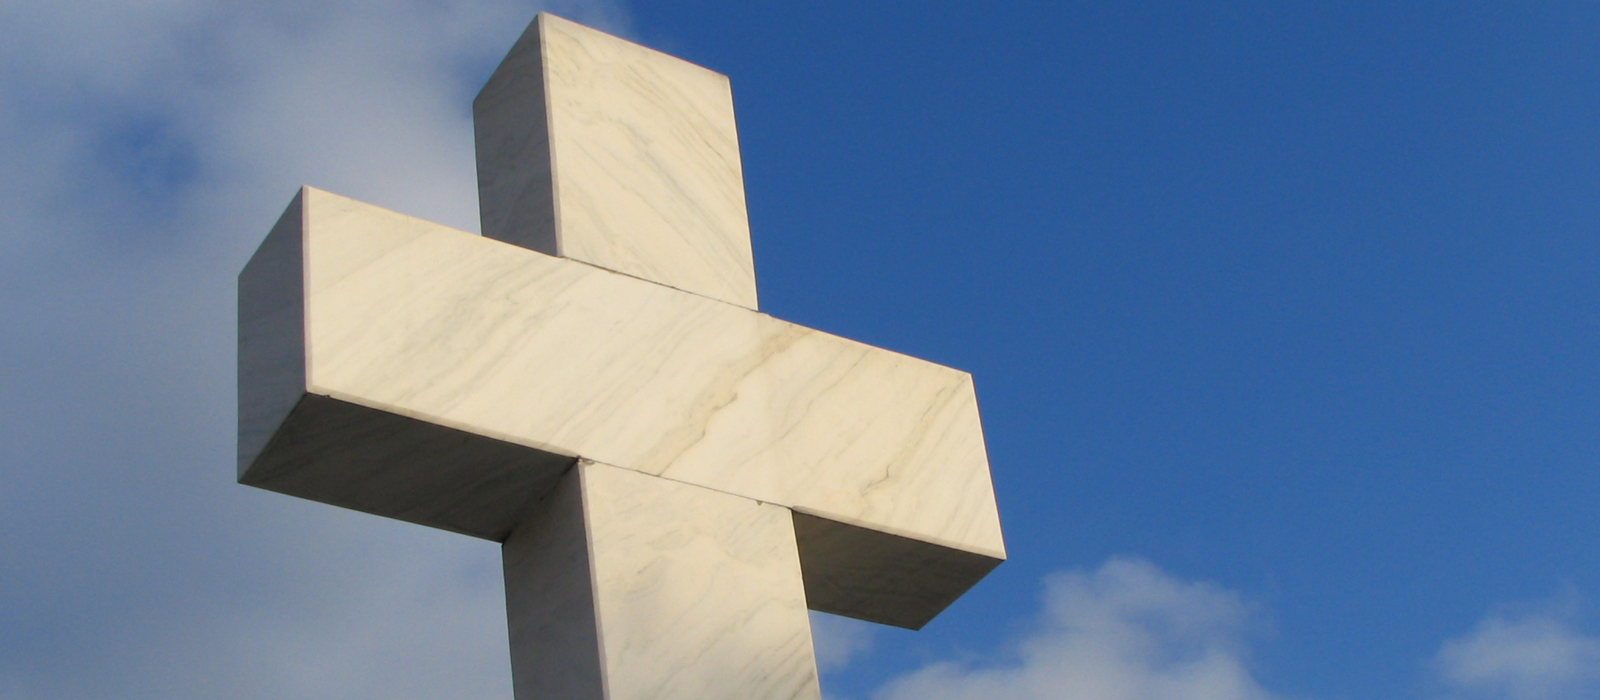 A large cross monument outside.